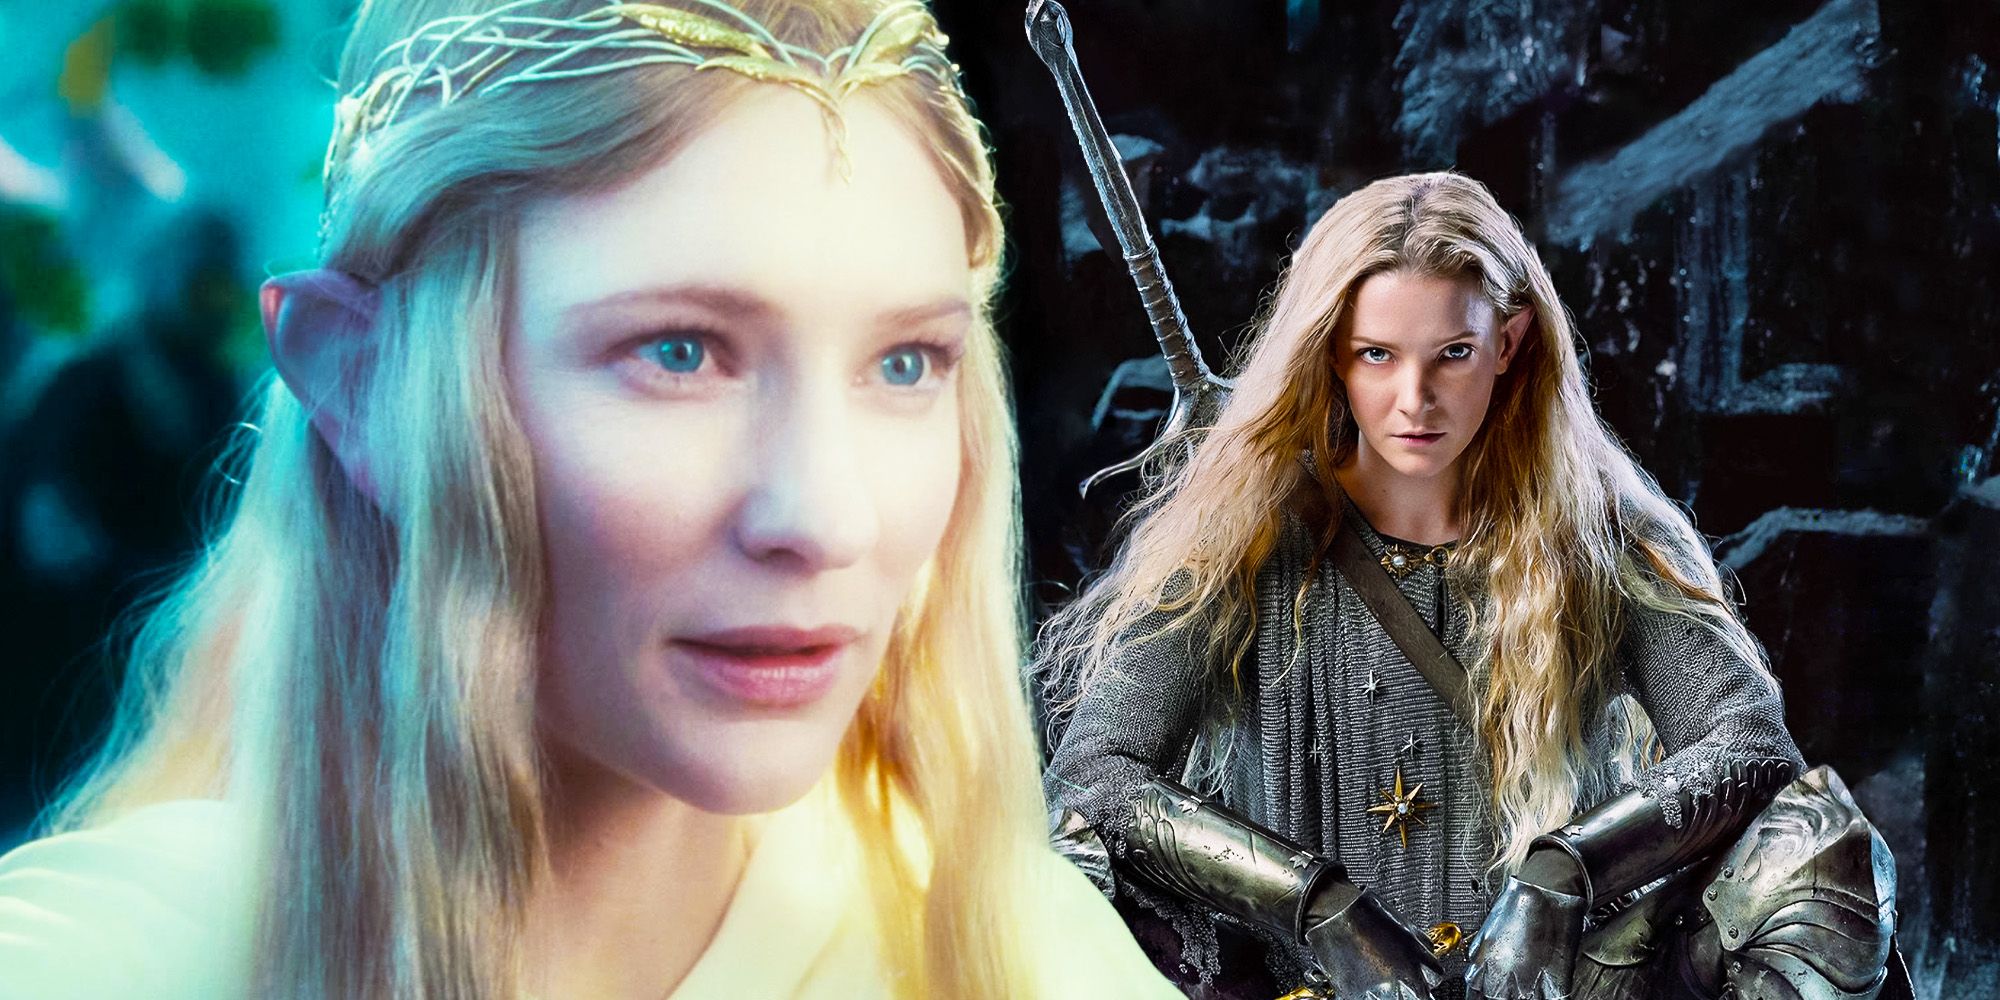 The Lord of the Rings: The Fellowship of the Ring - Movies on Google Play